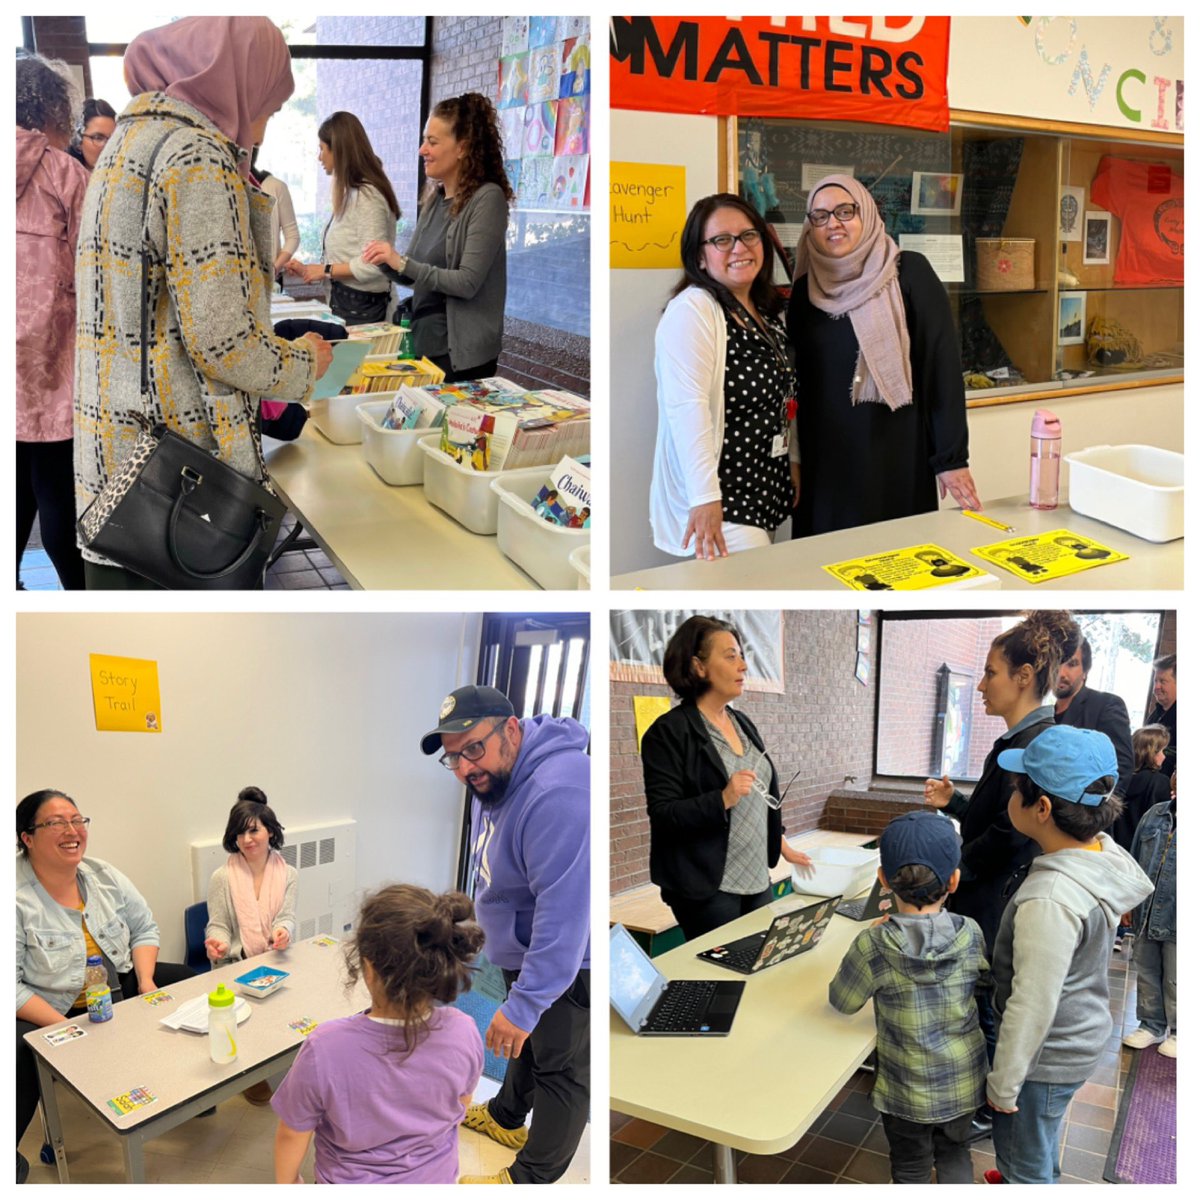 Community engagement matters. Family Literacy Night increases social & academic support, well-being & deeper understanding. We walk in partnership for the benefit of our Ss. @tdsb @LN10Alvarez @LC2_TDSB @EarlyYearsTDSB @TDSB_MHWB @TDSB_PCE @TDSB_CSW @Ms_Castellon @mikkihymus